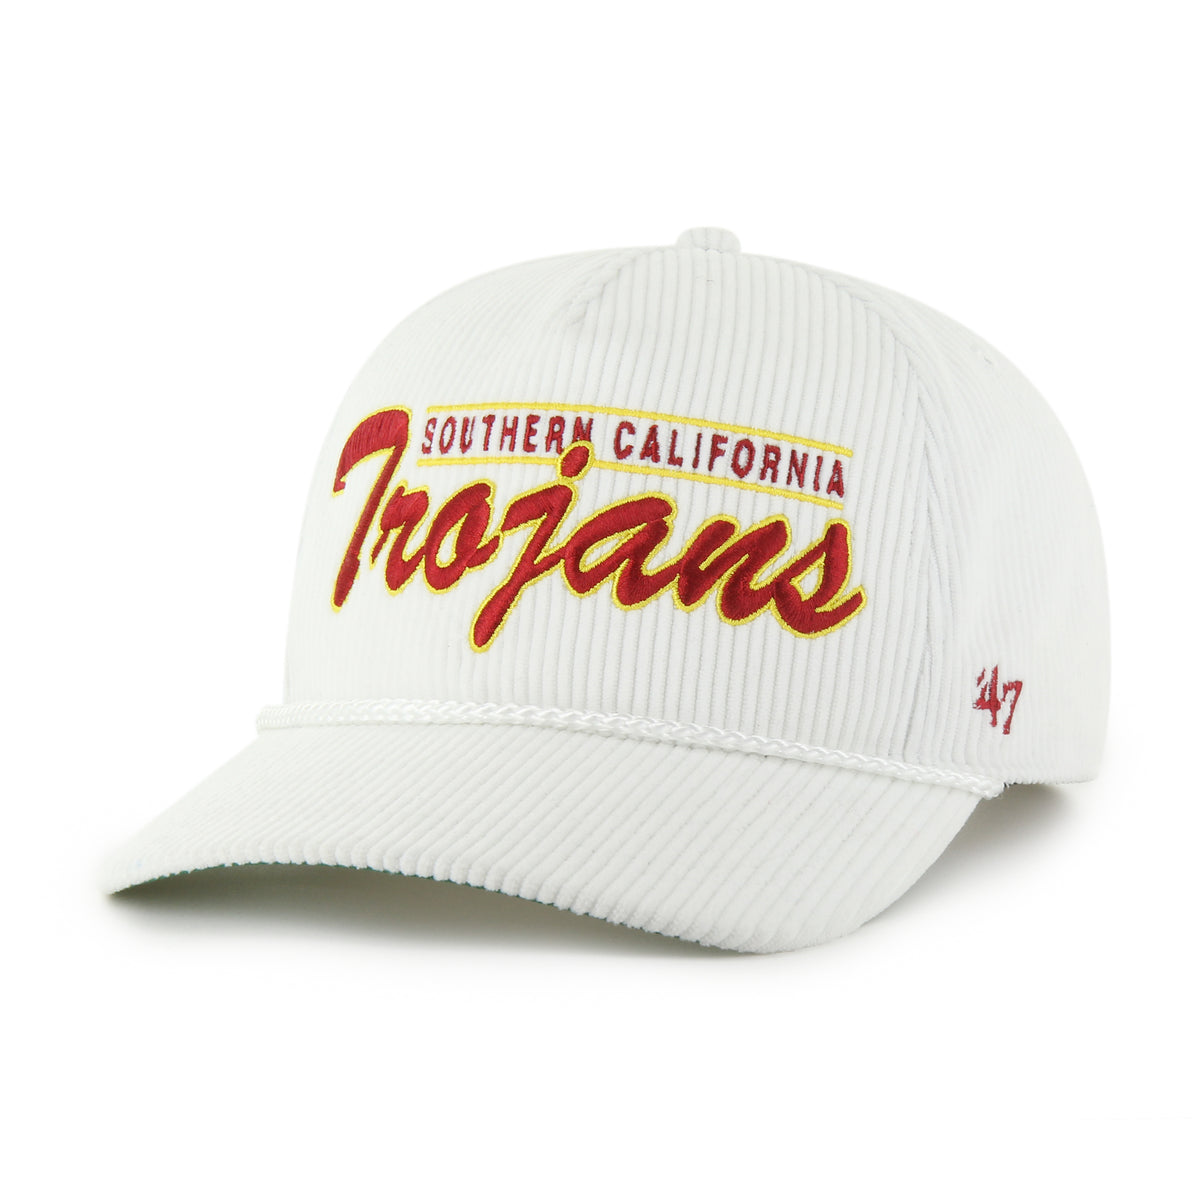 USC RETAIL SOUTHERN CALIFORNIA TROJANS GRIDIRON '47 HITCH RELAXED FIT